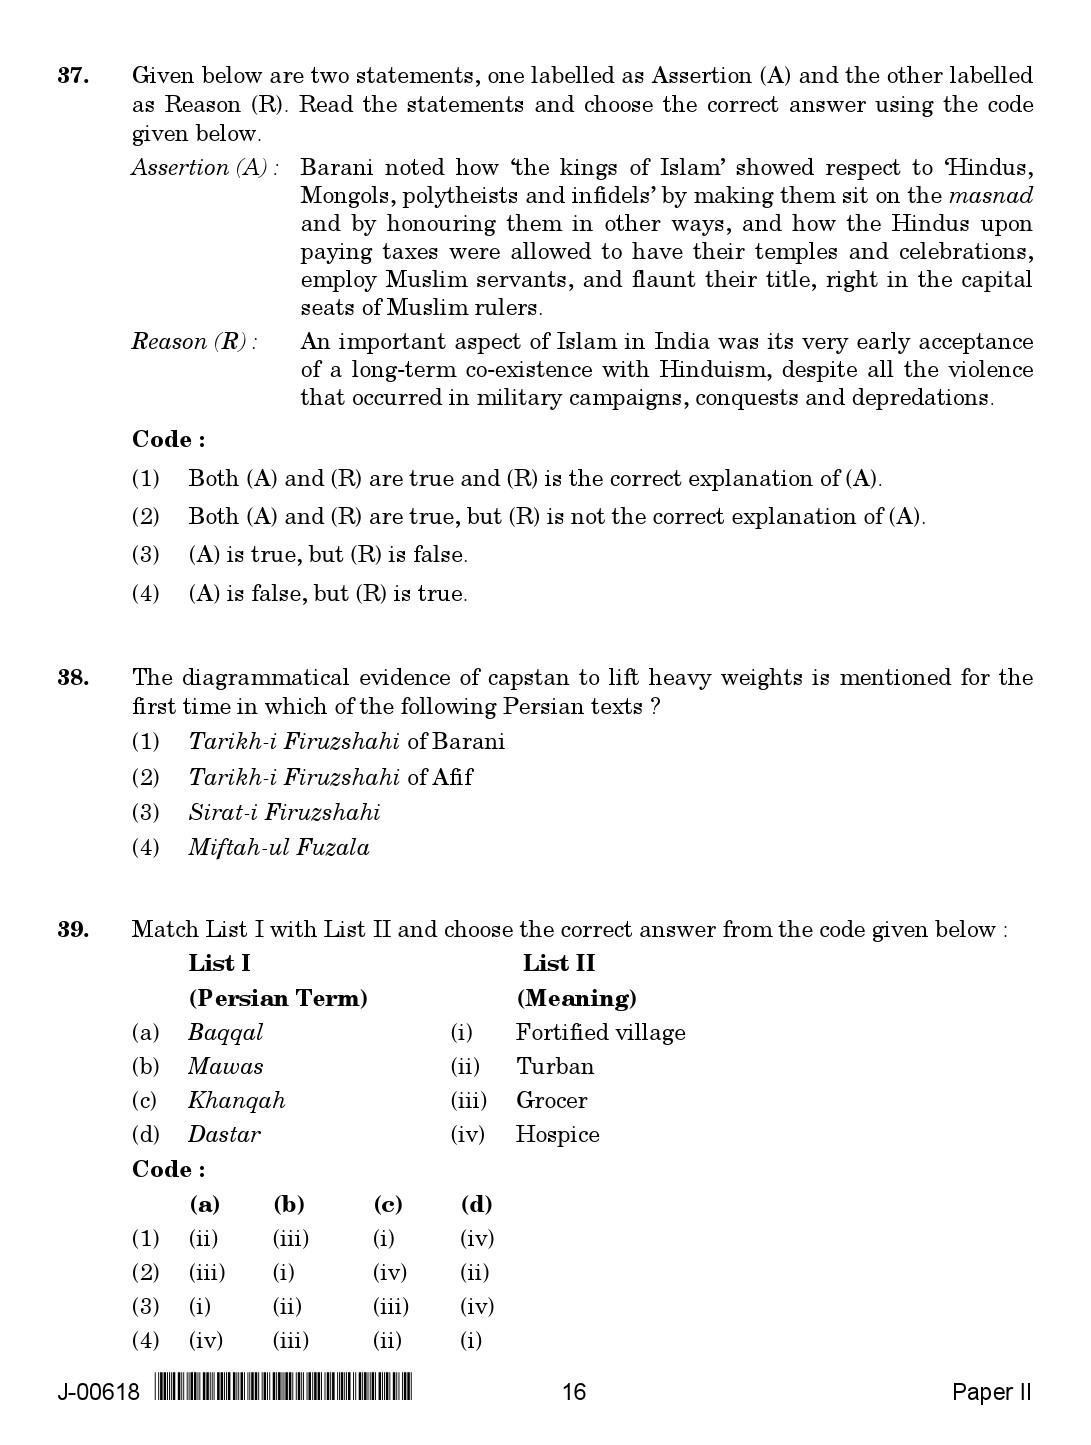 History Question Paper II July 2018 in English 2nd Exam 9